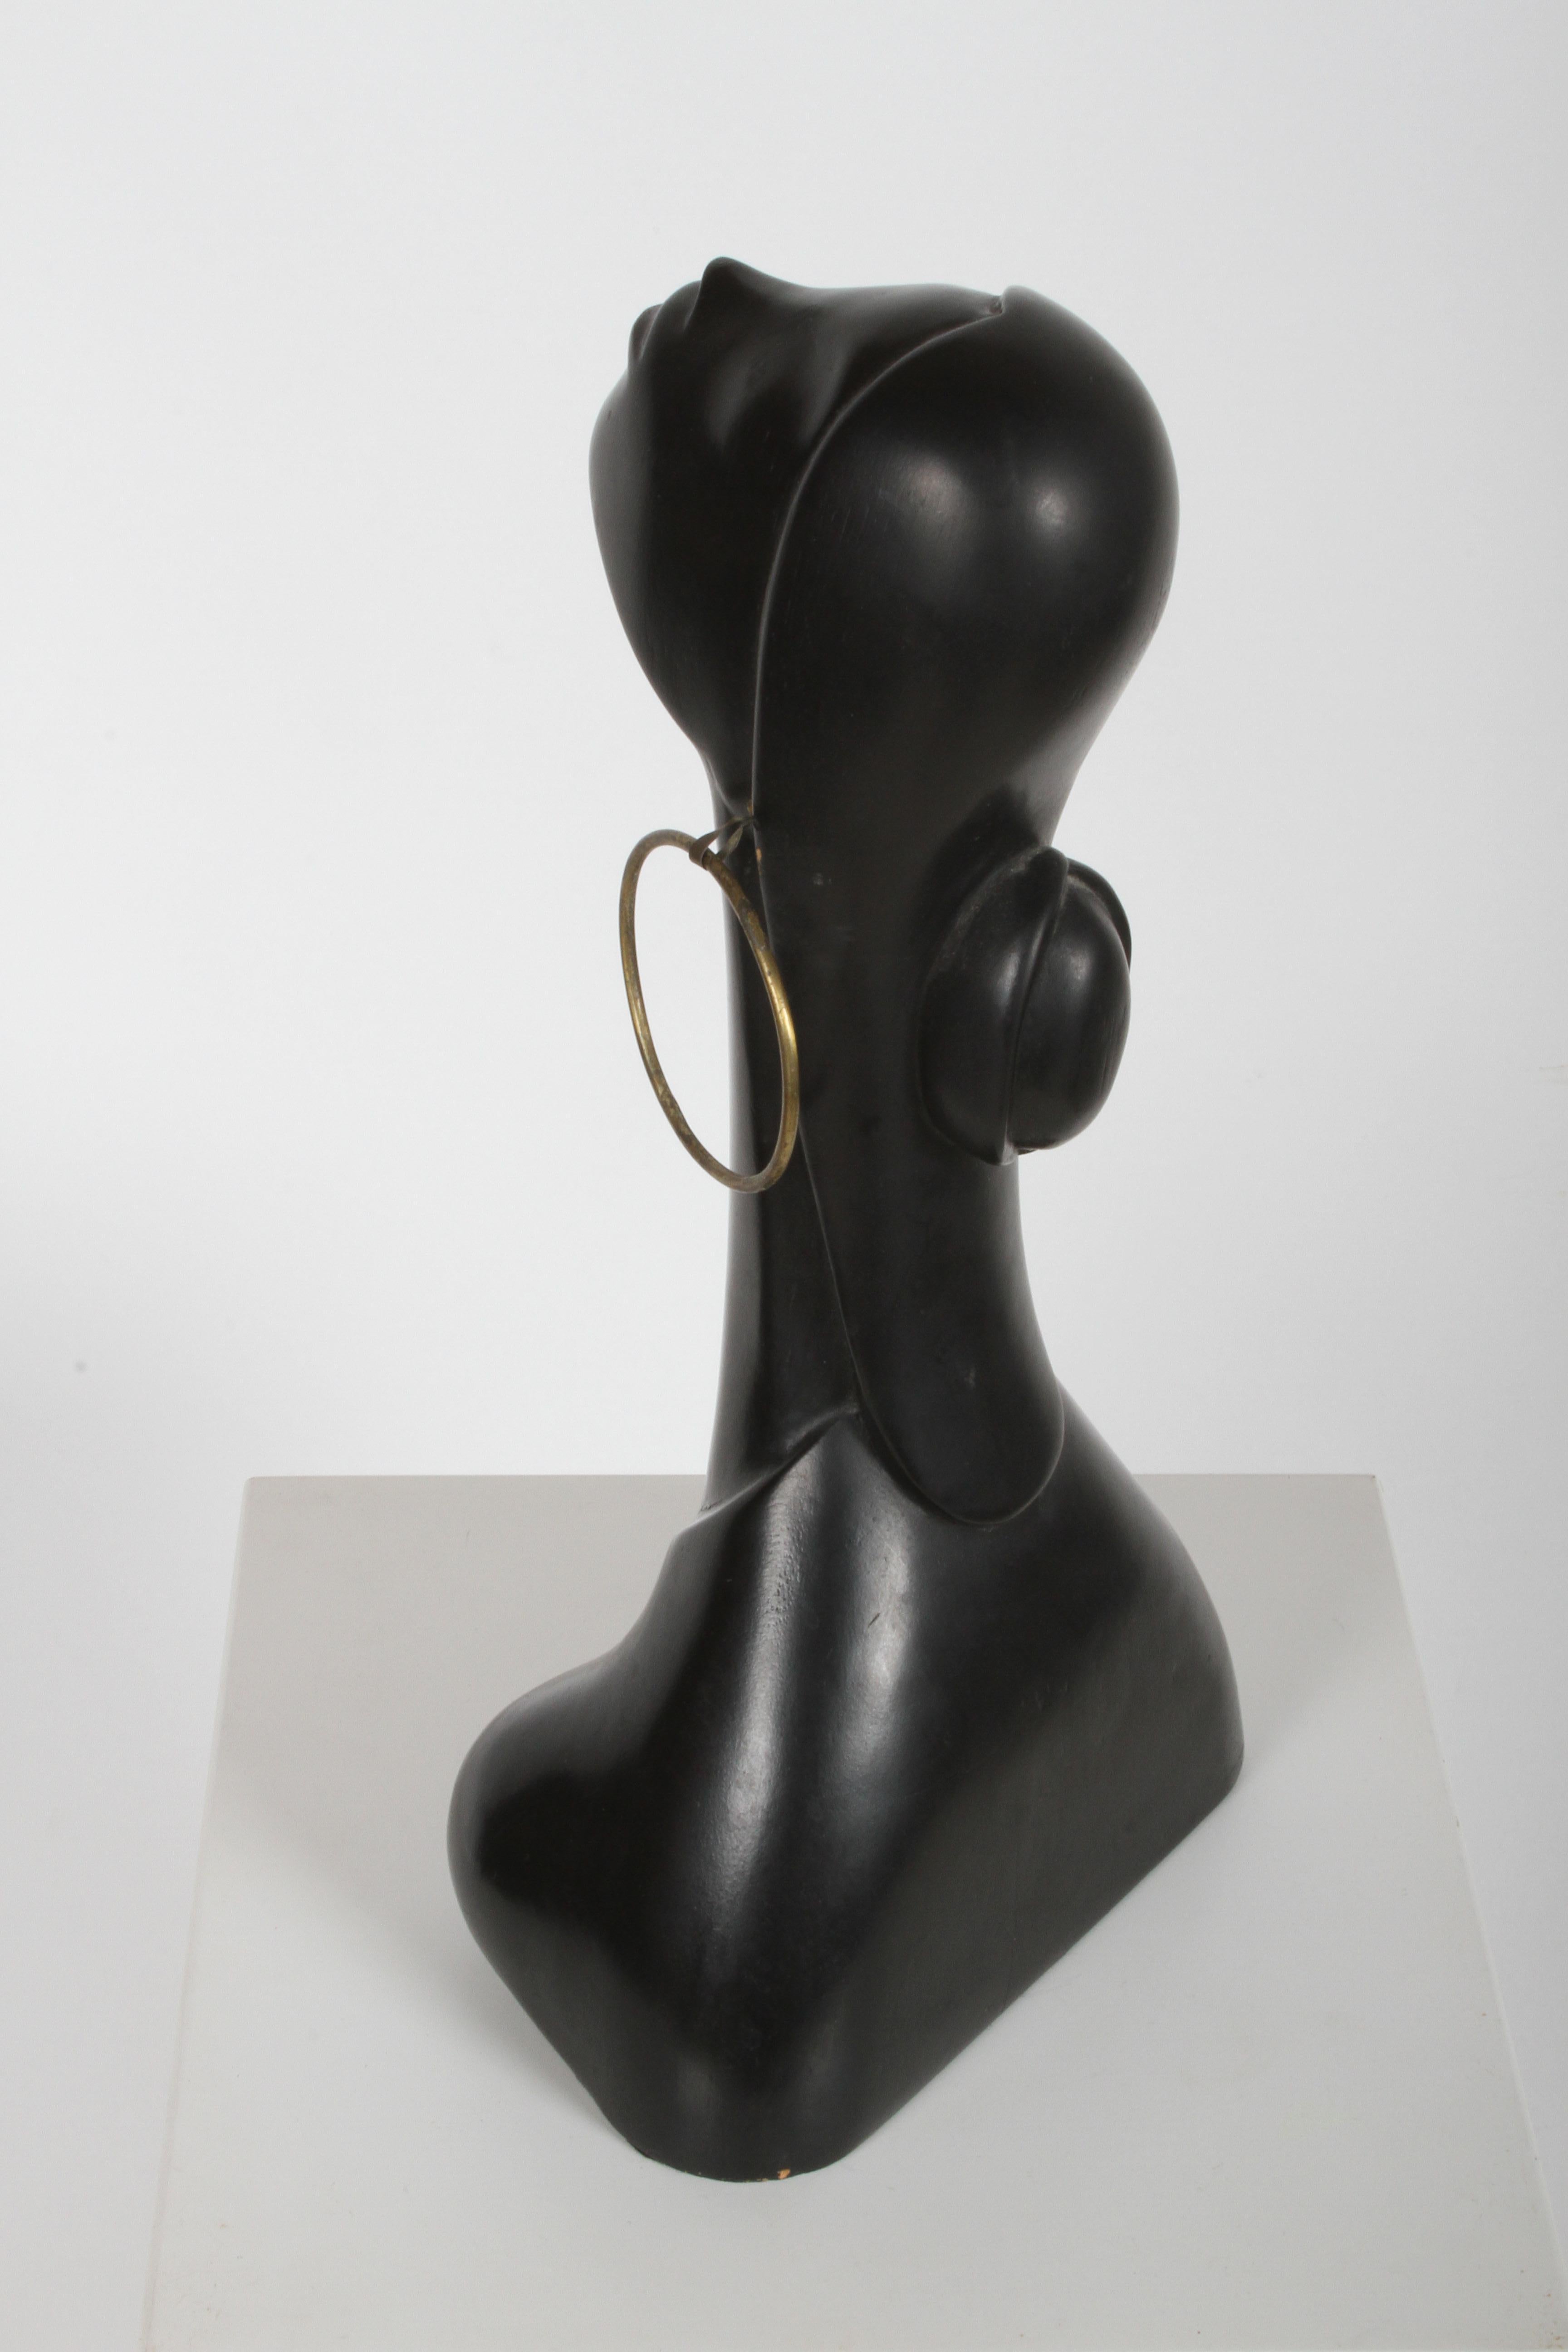 Hagenauer Style Nude Black African Female Bust with Brass Earring 1